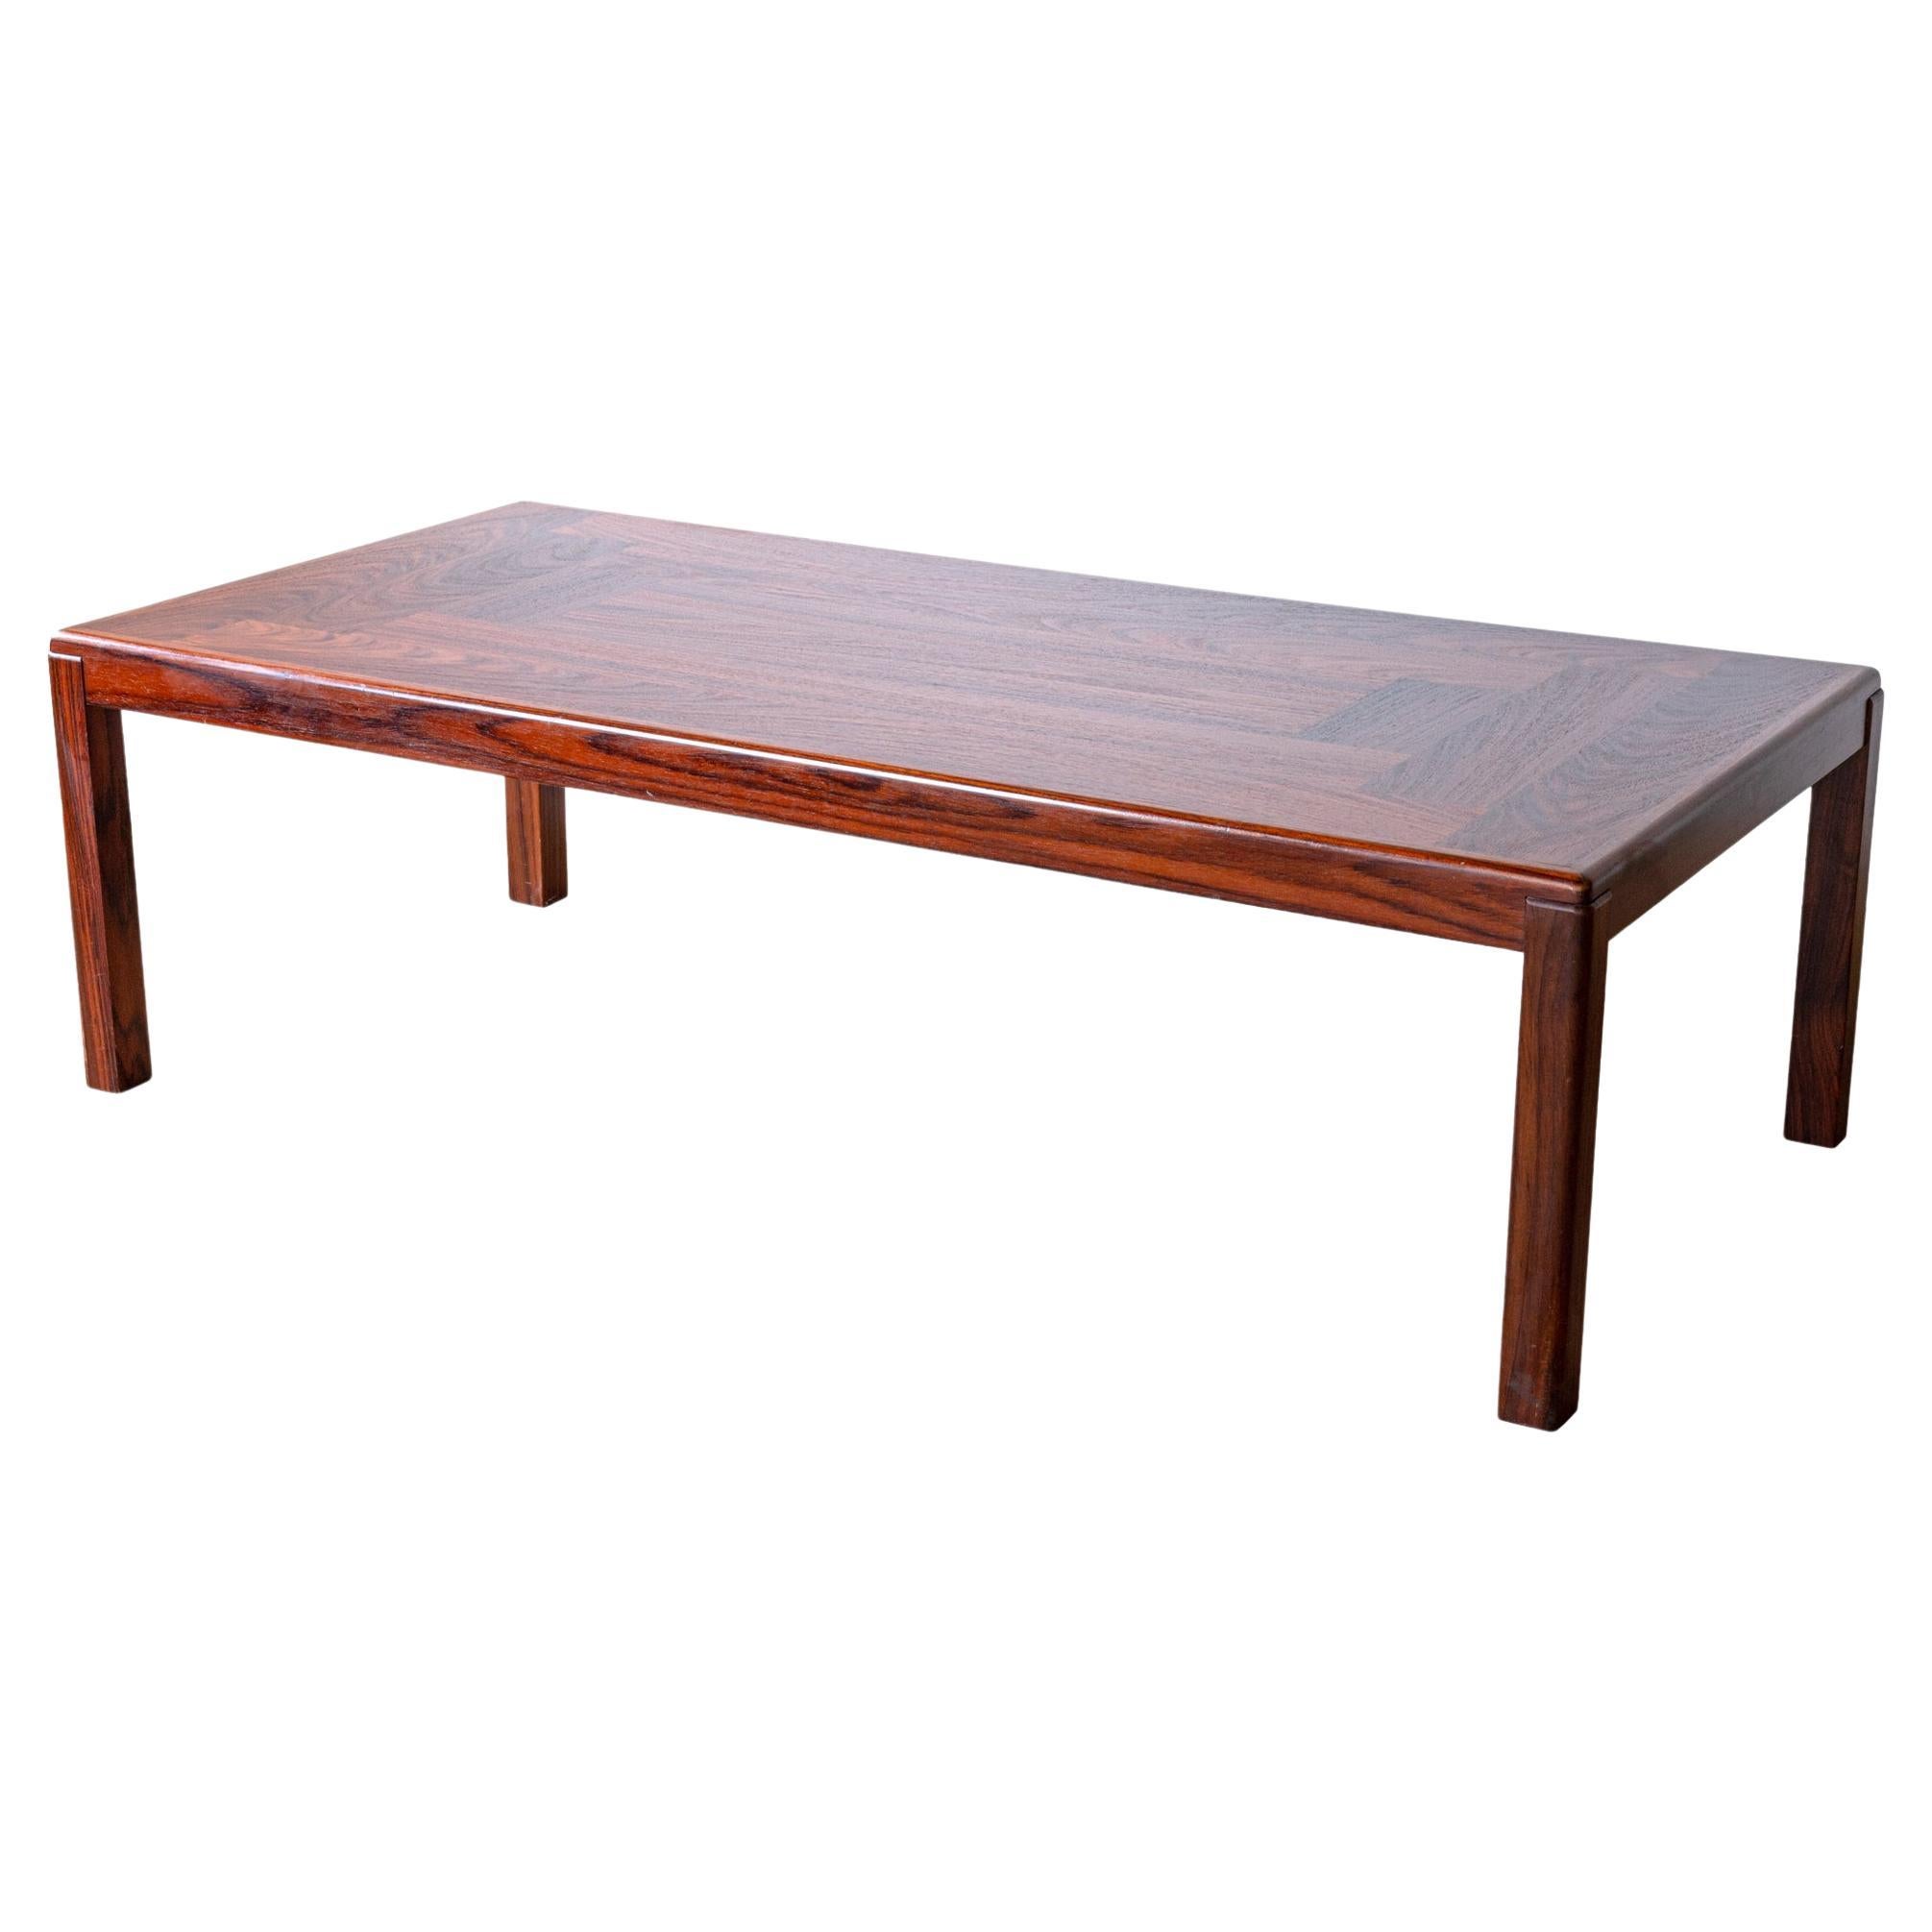 Vejle Stole and Mbelfabrik Danish Rosewood Rectangular Coffee Cocktail Table For Sale